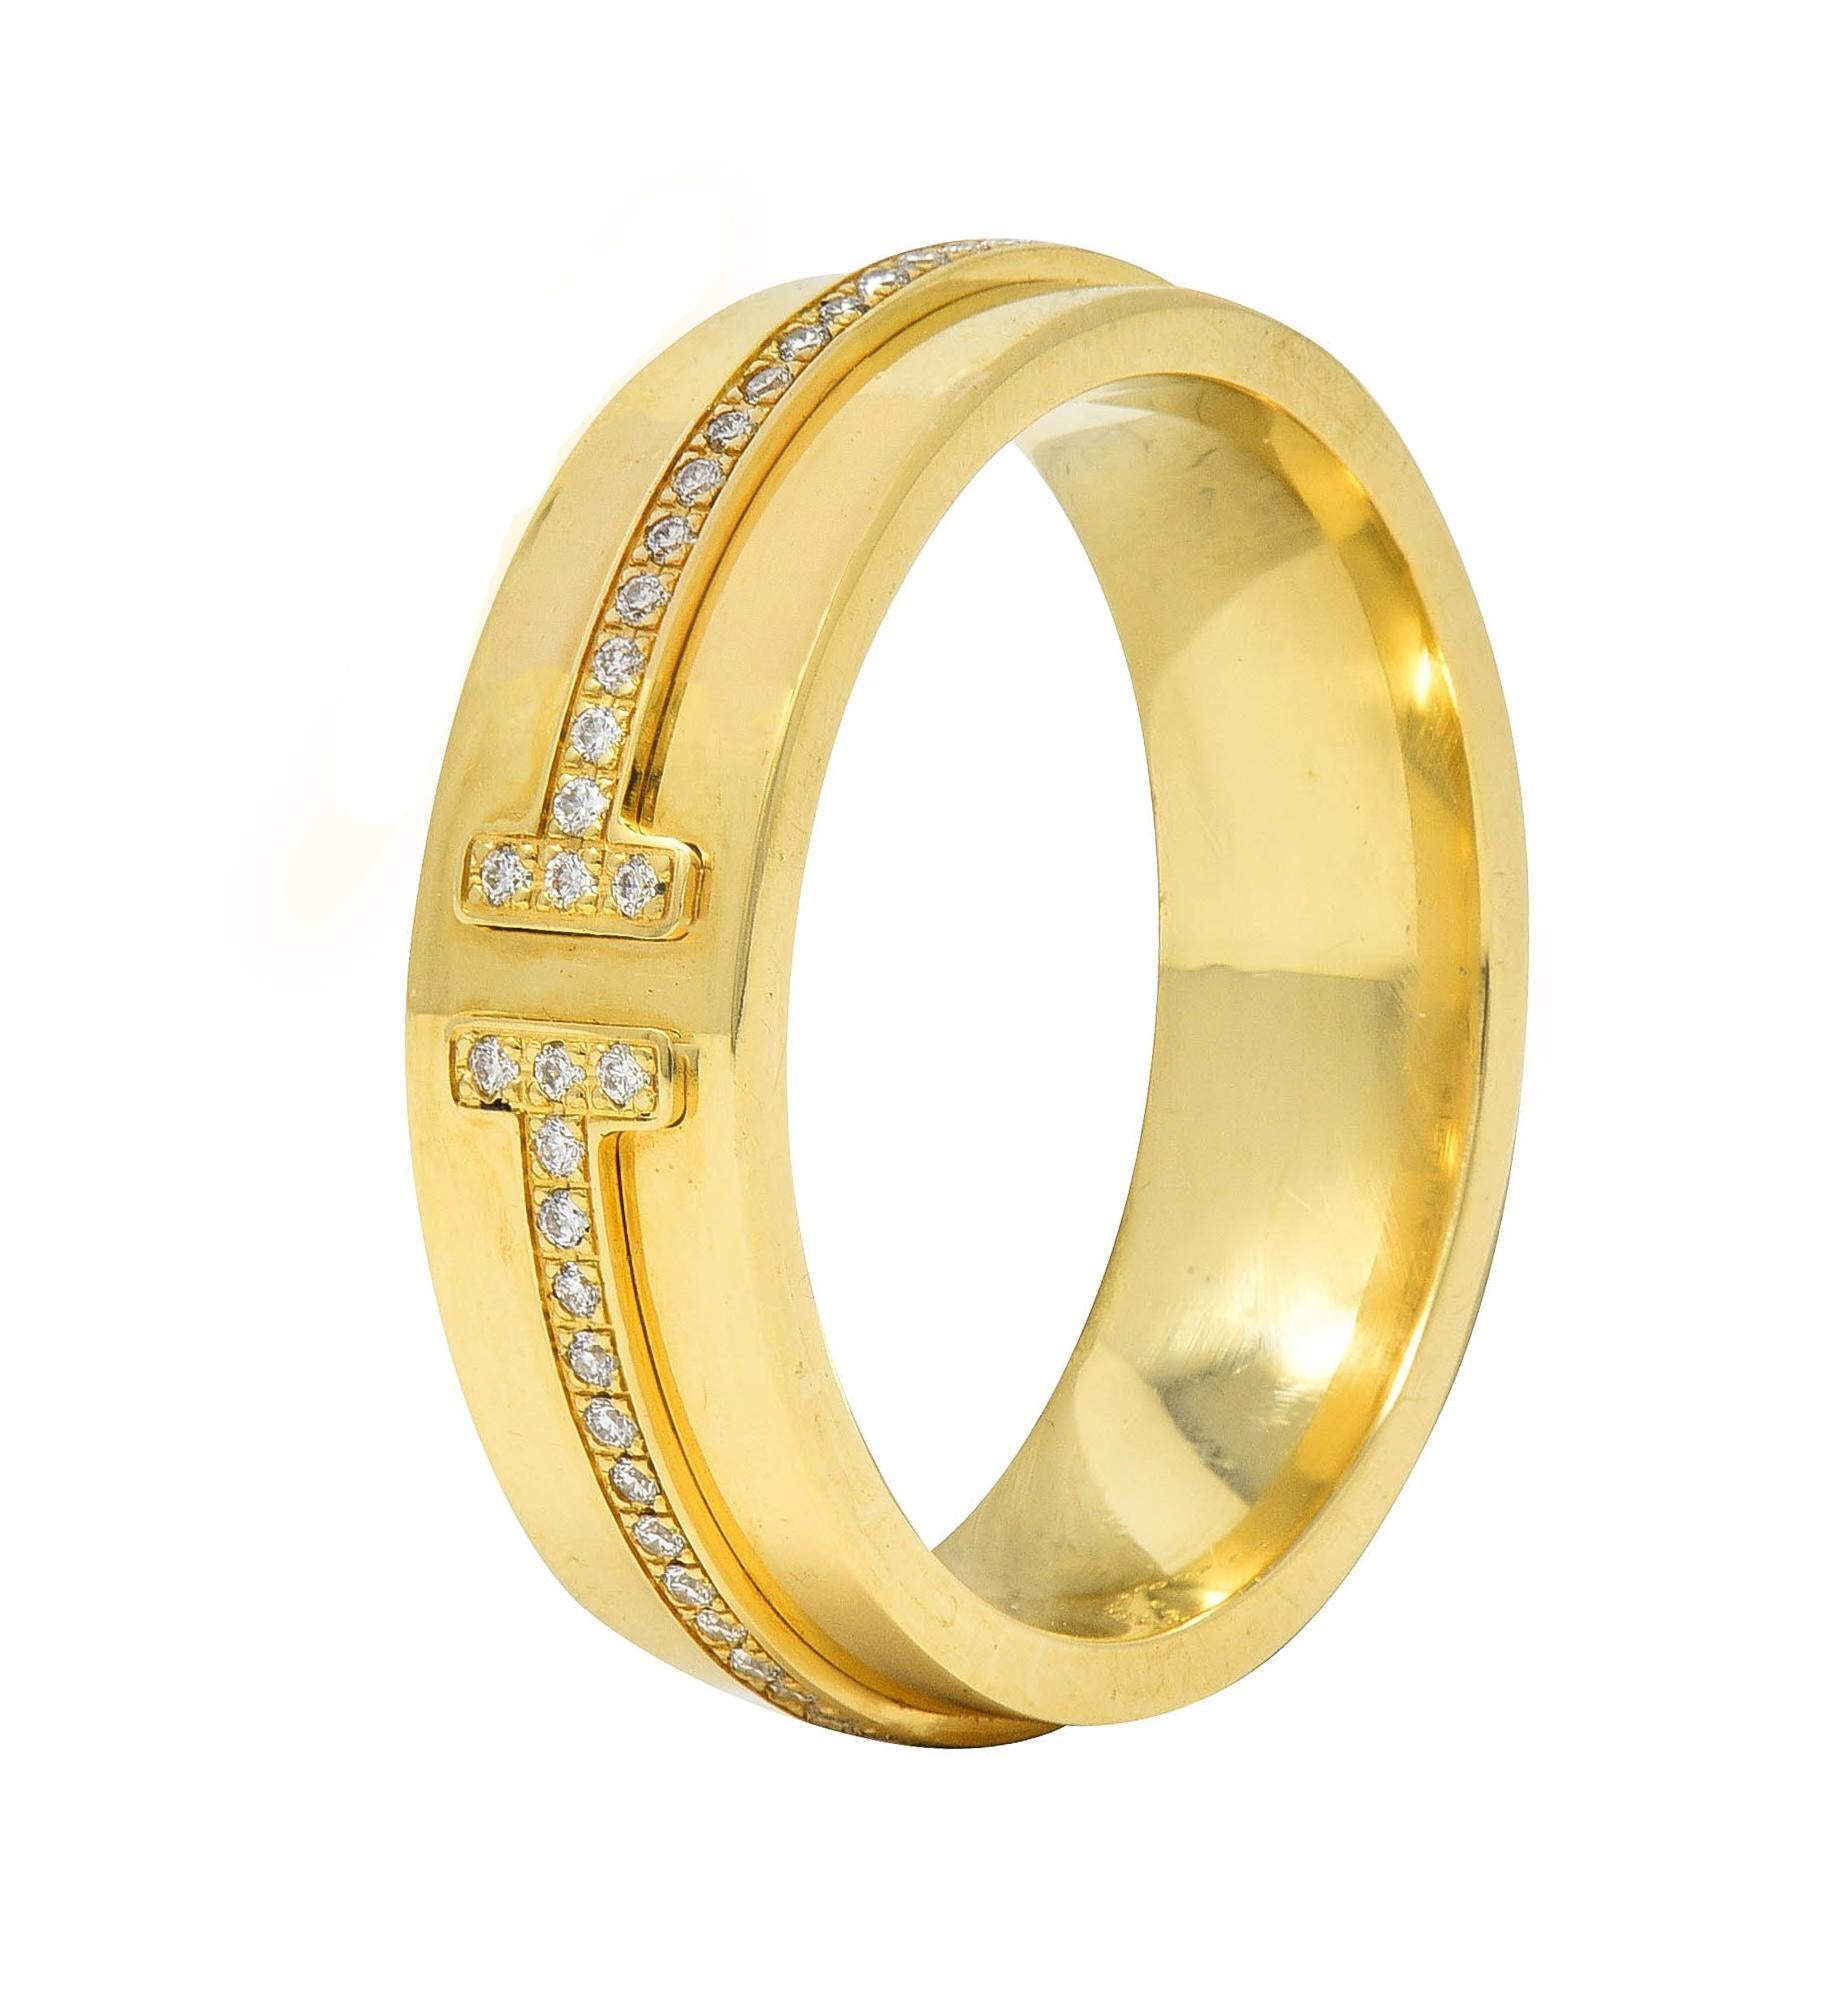 Designed as a wide gold band featuring a raised band terminating with 'T' motif
Bead set throughout with round brilliant cut diamonds
Weighing approximately 0.12 carat total 
G color with VS clarity 
With high polish finish 
Stamped for 18 karat